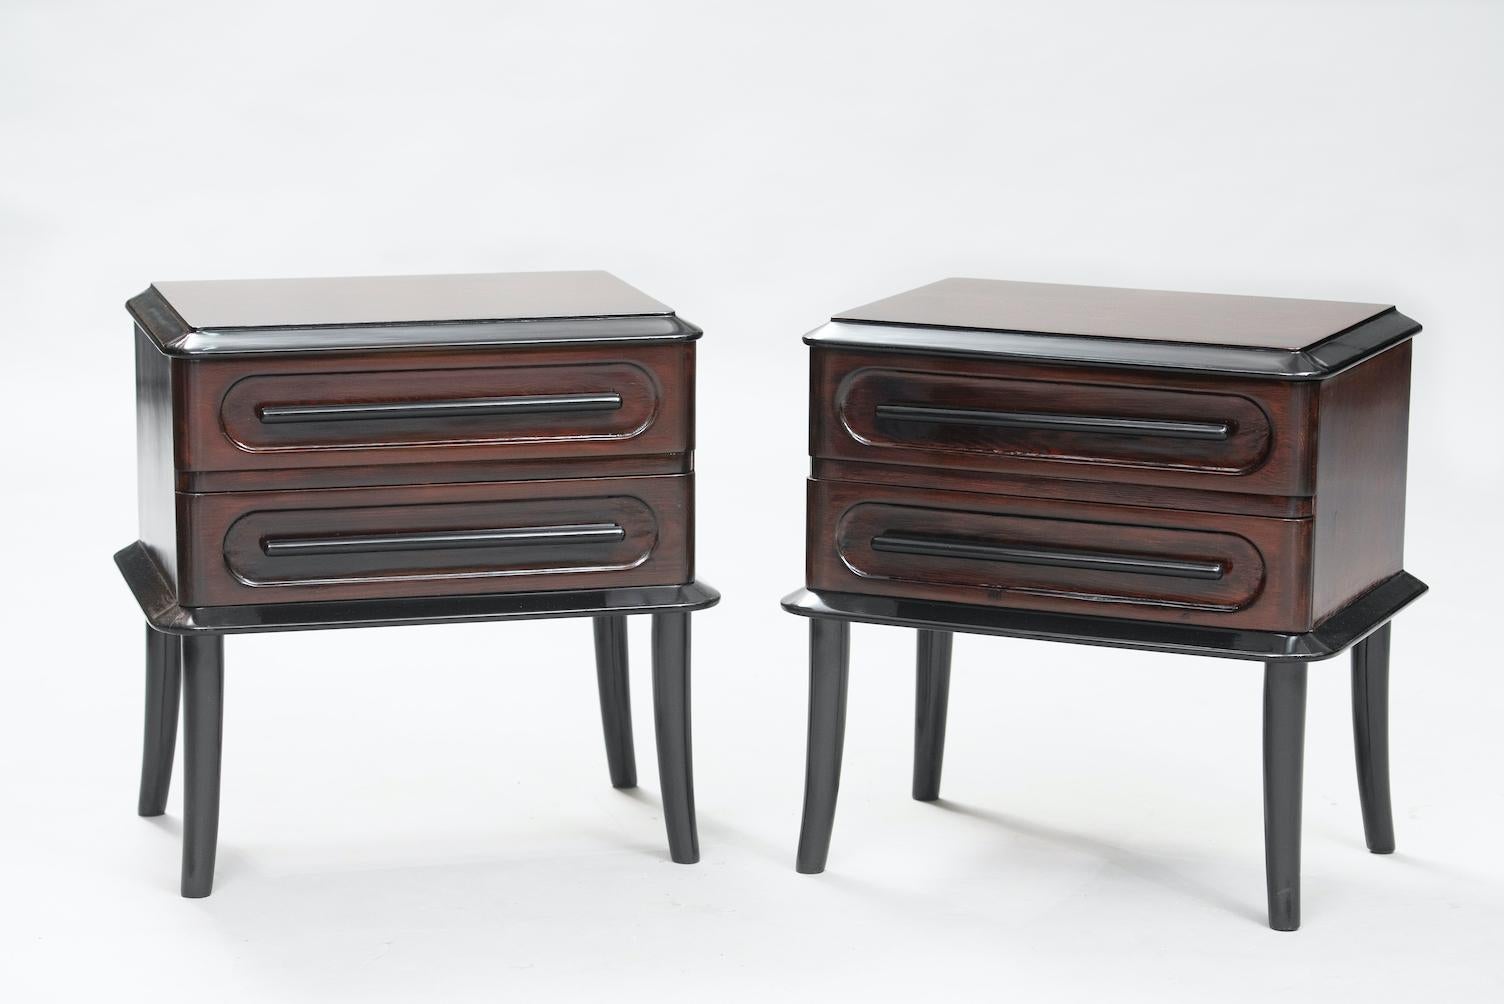 Set of two 1940s Scandinavian birch night stands, with ebonized legs and drawers handles, the birch it self was darkened in a warm rich color.